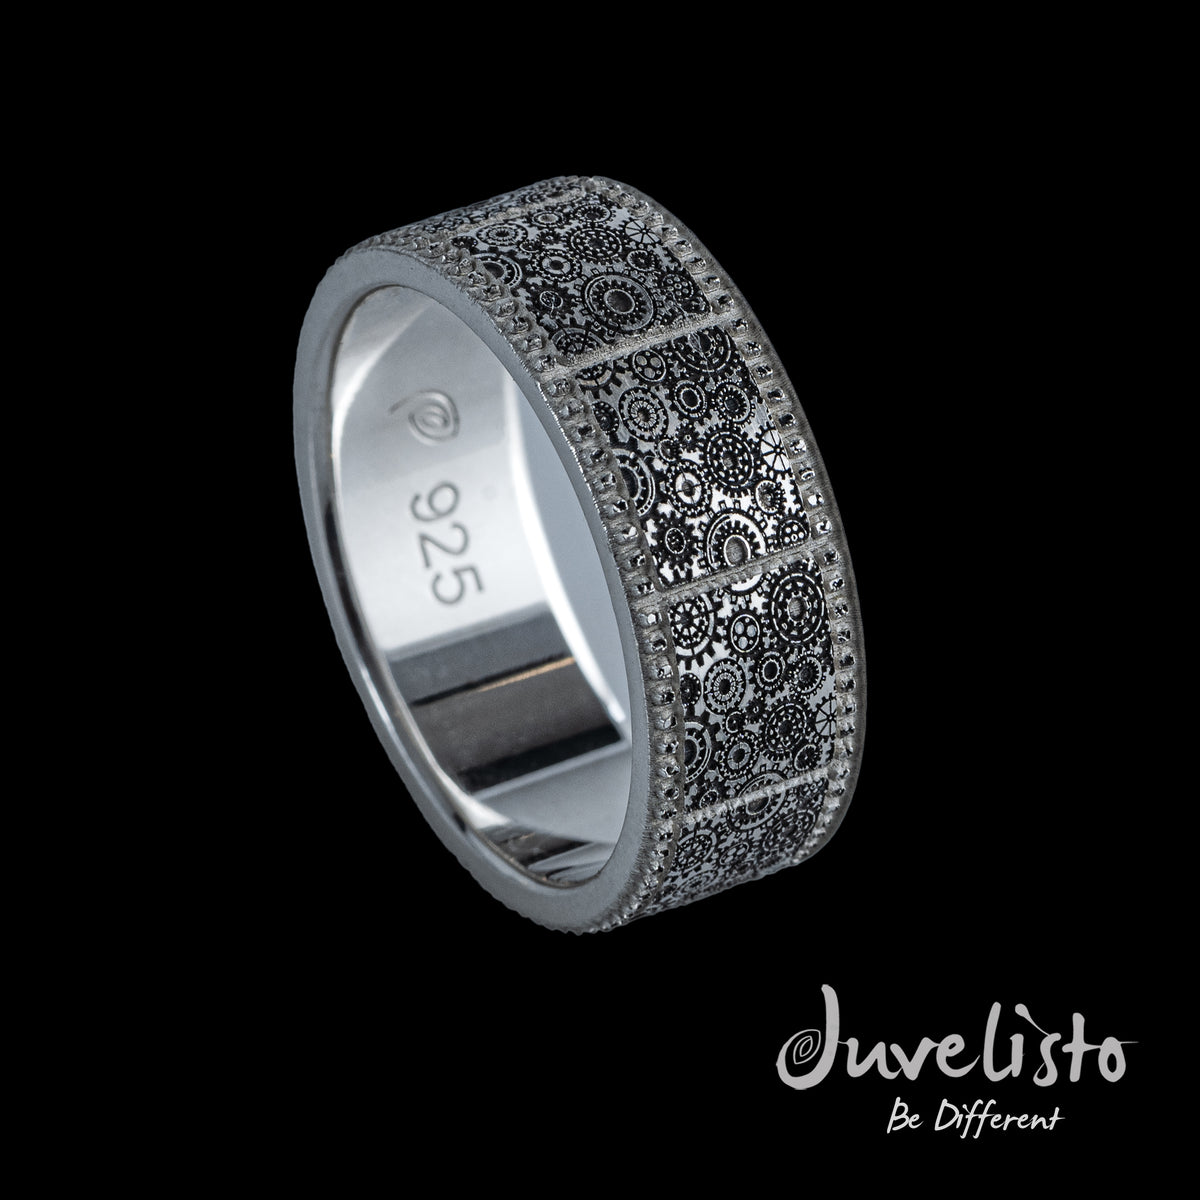 Juvelisto Design Sterling Silver Band with Decorative Circular Pattern